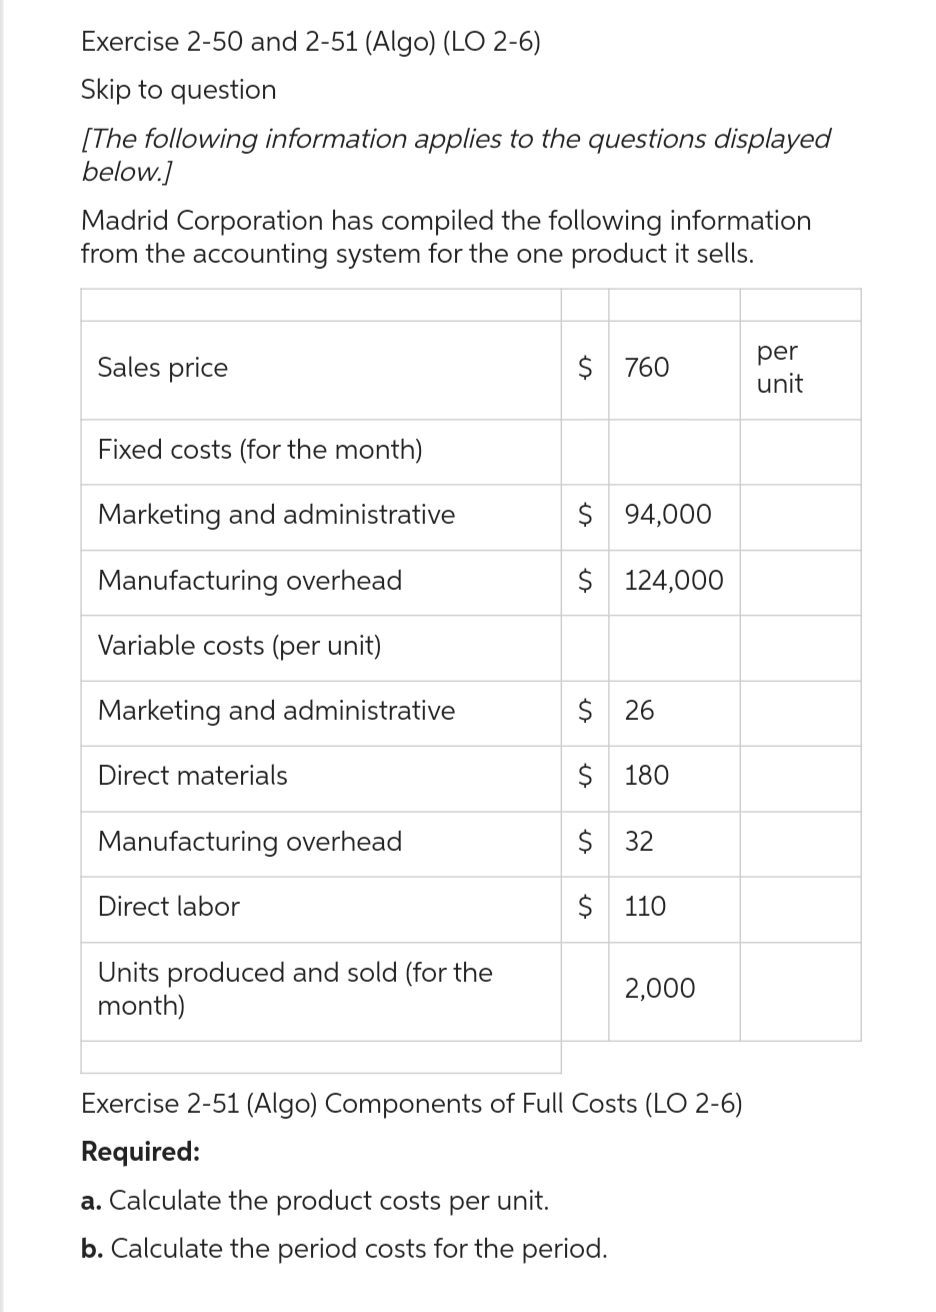 Exercise 2-50 and 2-51 (Algo) (LO 2-6)
Skip to question
[The following information applies to the questions displayed
below.]
Madrid Corporation has compiled the following information
from the accounting system for the one product it sells.
Sales price
Fixed costs (for the month)
Marketing and administrative
Manufacturing overhead
Variable costs (per unit)
Marketing and administrative
Direct materials
Manufacturing overhead
Direct labor
Units produced and sold (for the
month)
$ 760
$ 94,000
$ 124,000
$ 26
$ 180
$ 32
$ 110
2,000
Exercise 2-51 (Algo) Components of Full Costs (LO 2-6)
Required:
a. Calculate the product costs per unit.
b. Calculate the period costs for the period.
per
unit